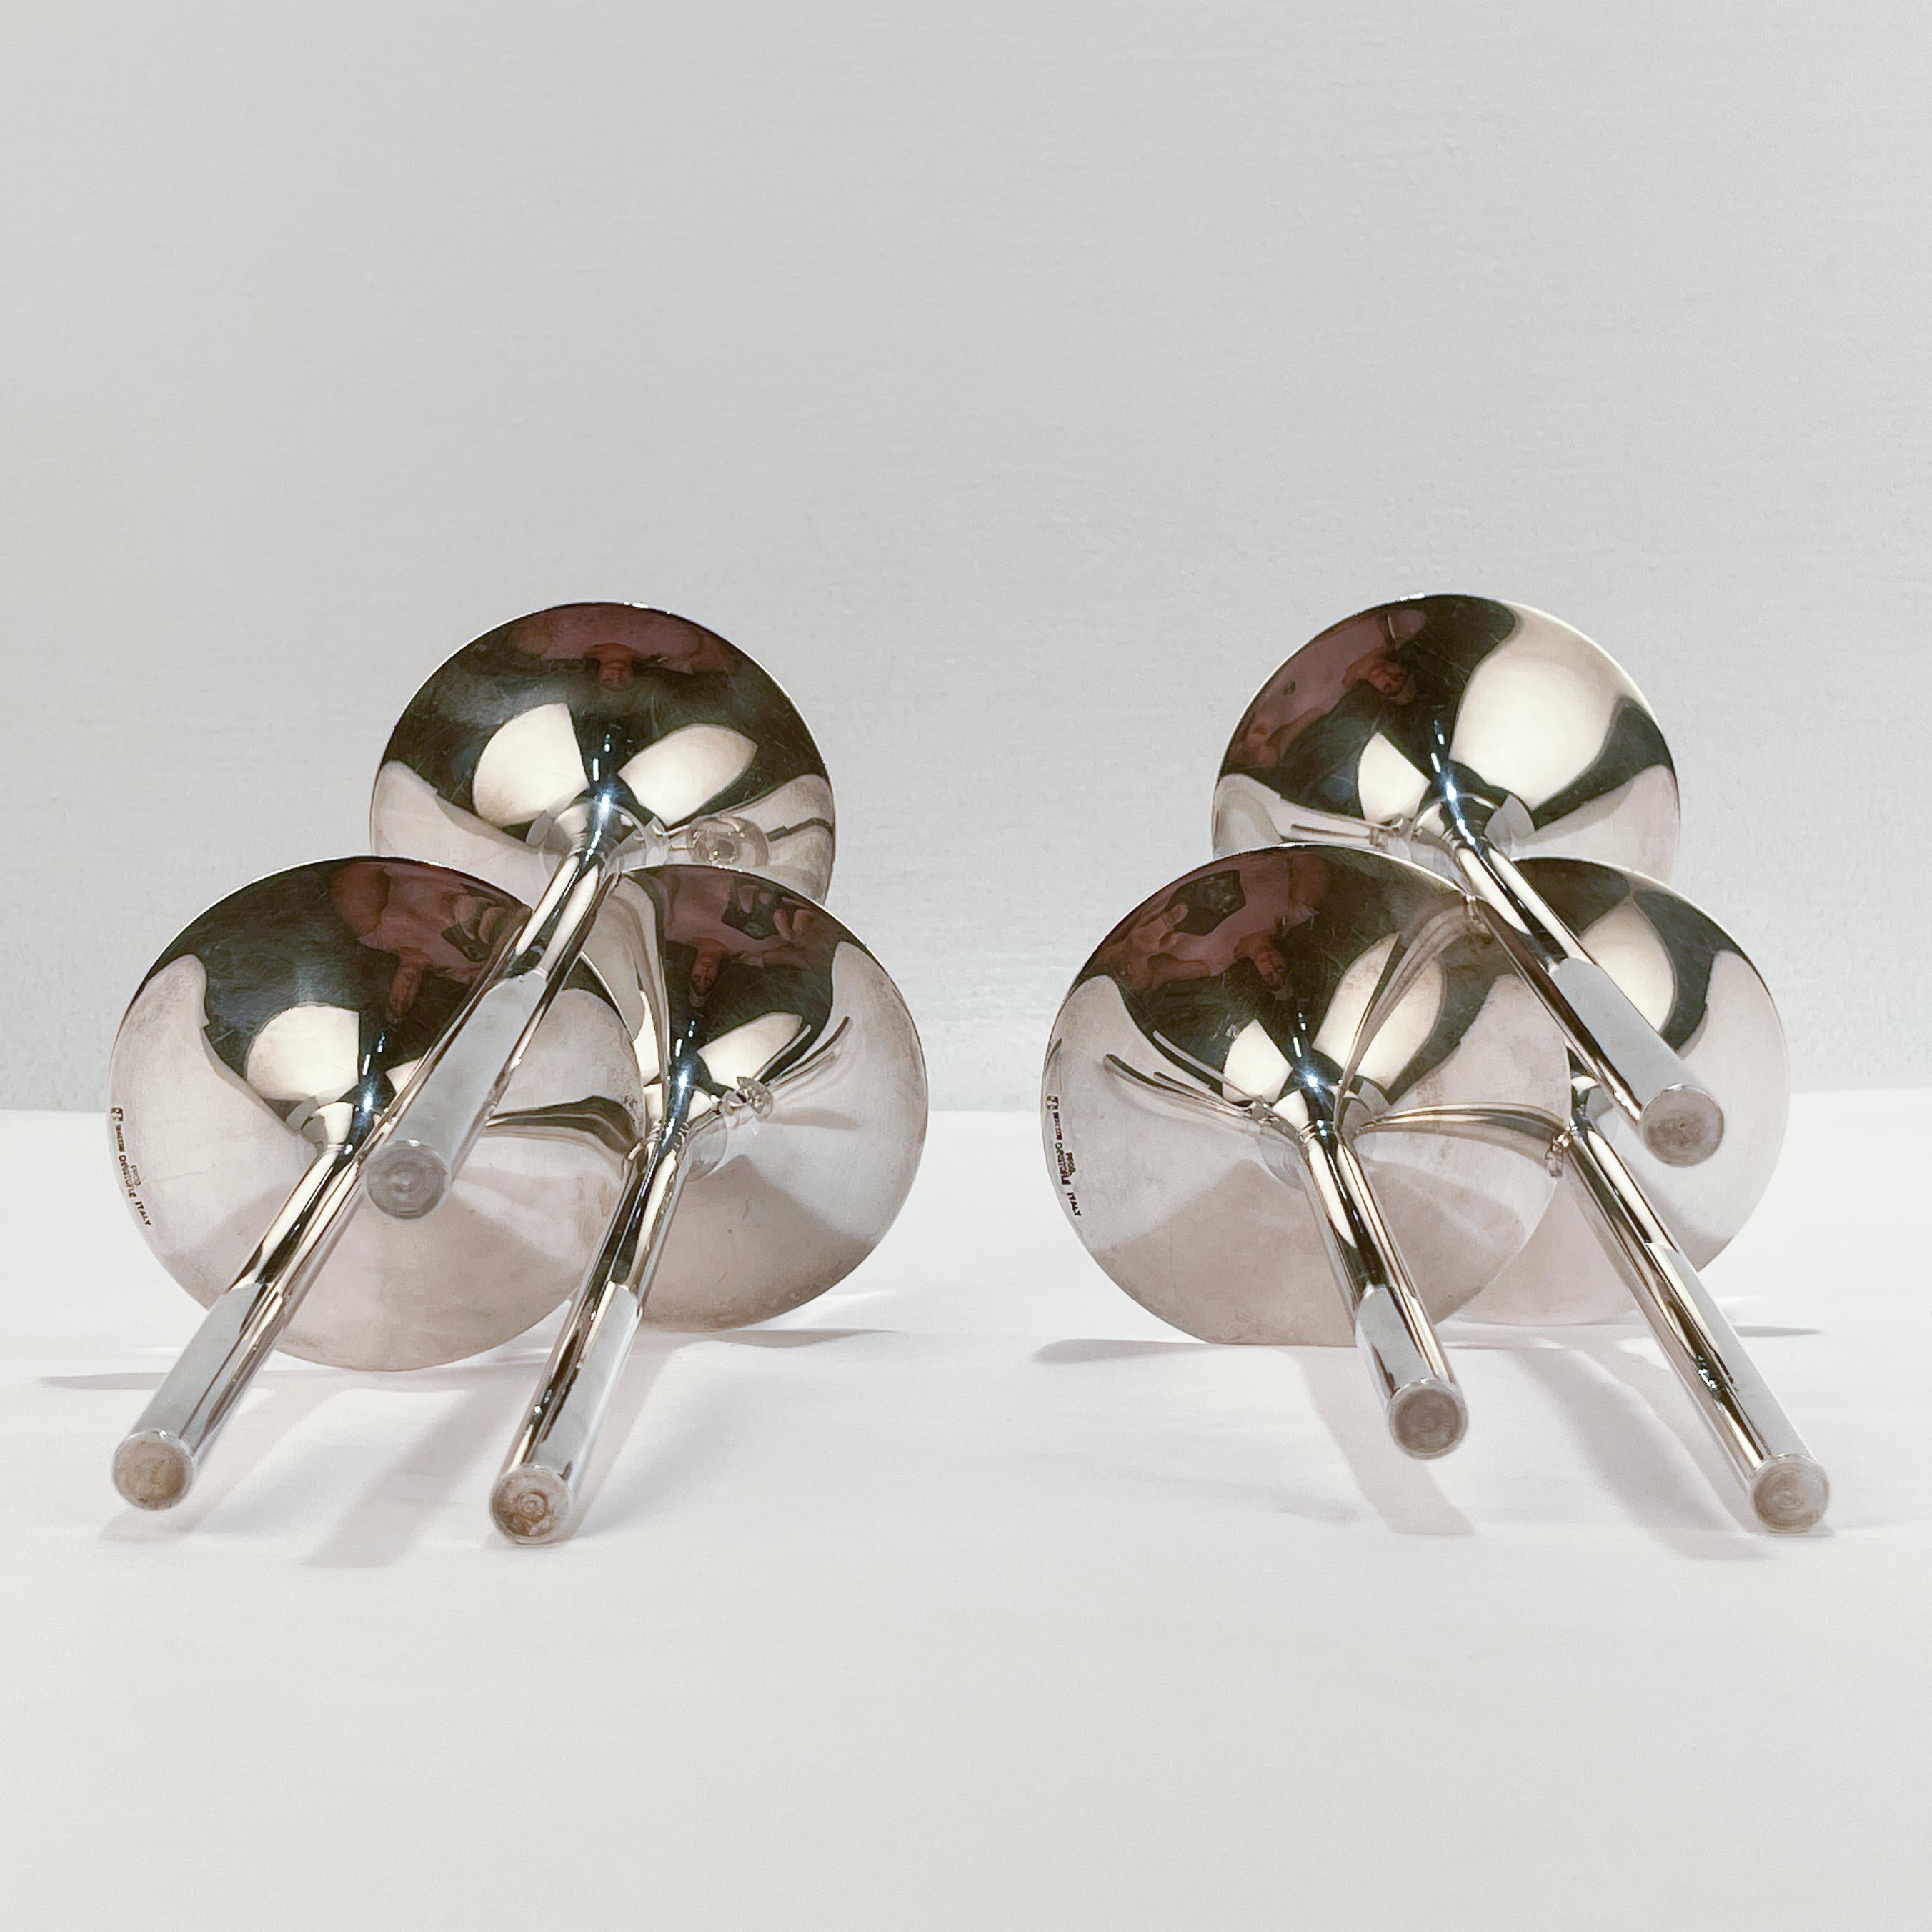 Pair of Modernist Silver Plate Candle Holders by Lino Sabattini for Christofle 2